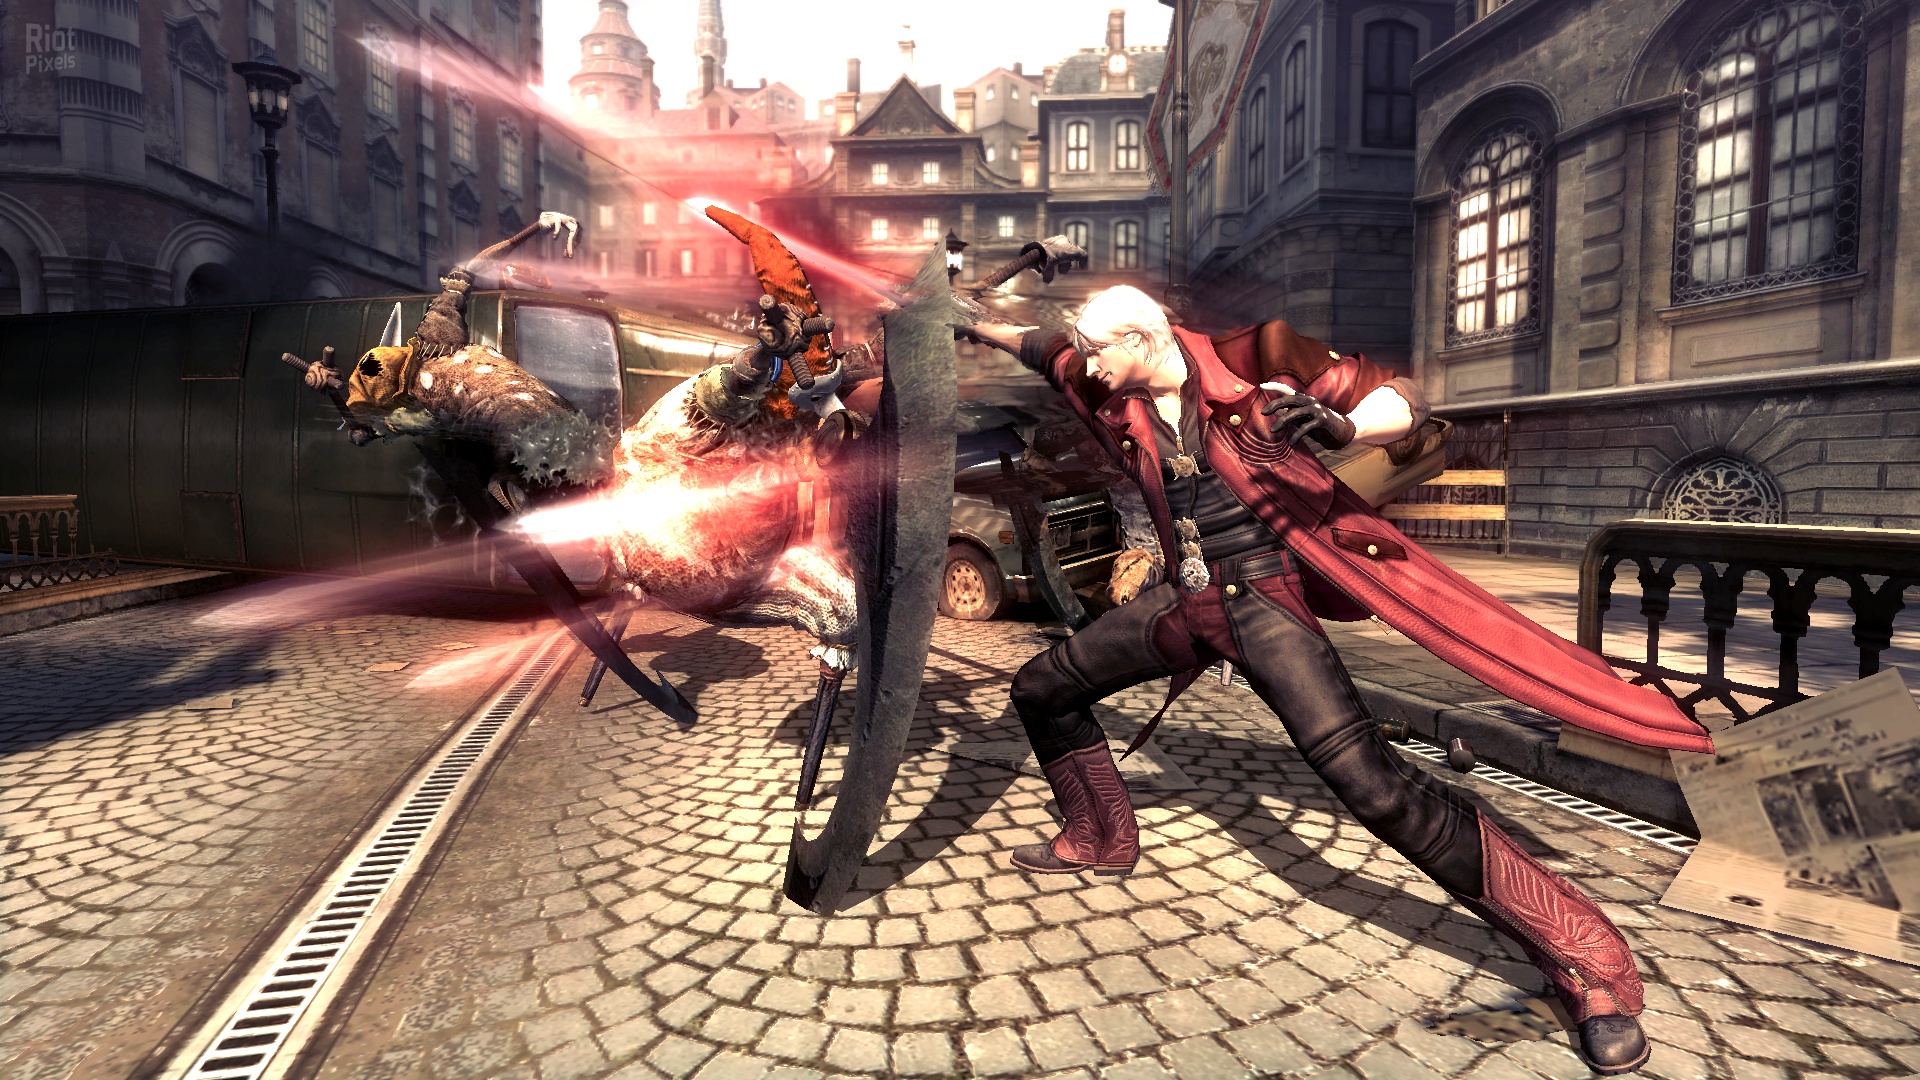 4 game come. DMC 4 ps3. Devil May Cry 4: Special Edition. Вумшд ьфк СКН 4 ызусуфду.